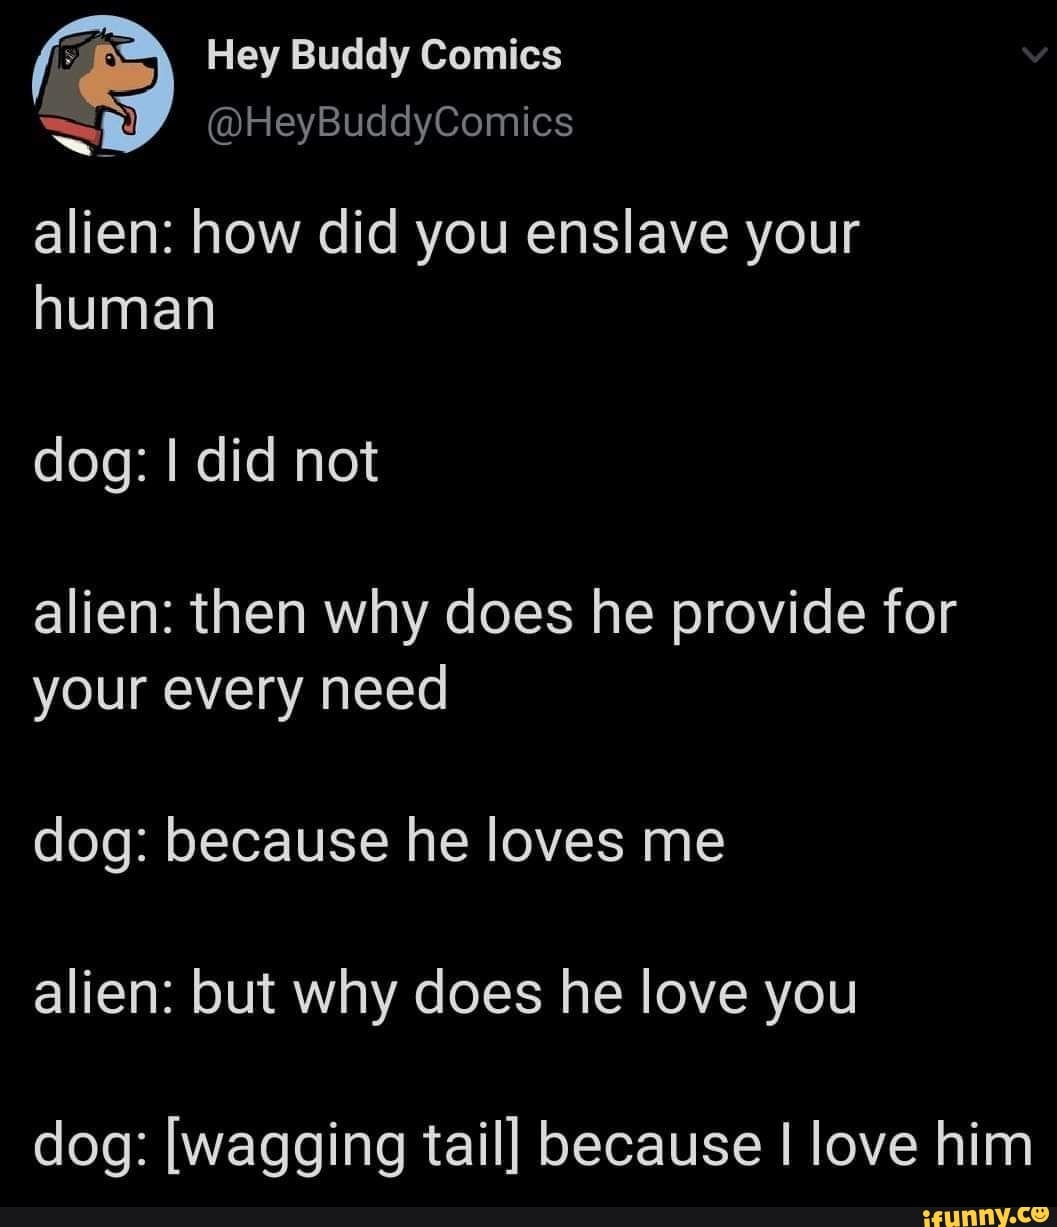 Alien How Did You Enslave Your Human Alien Then Why Does He Provide For Your Every